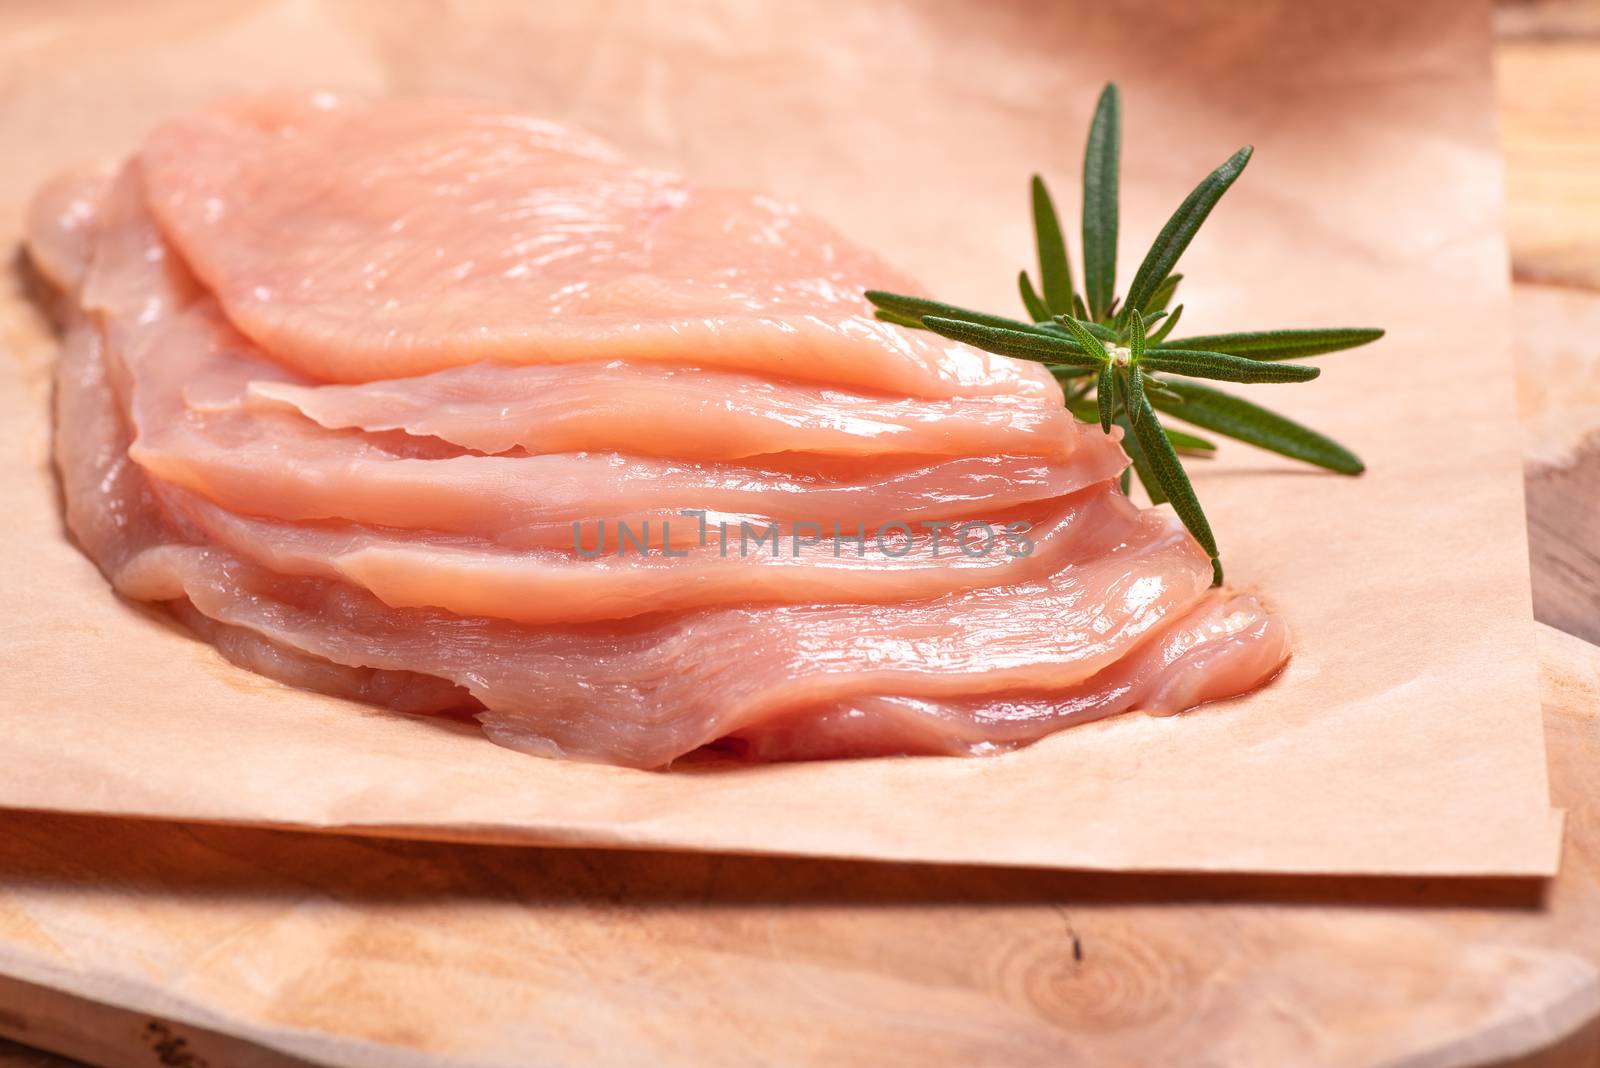 Raw sliced chicken meat close-up. Sotilissimo. Delicious dietary meat. Cooking,food of meat and fillets.Close-up view of raw, fresh, choped and sliced chicken meat.